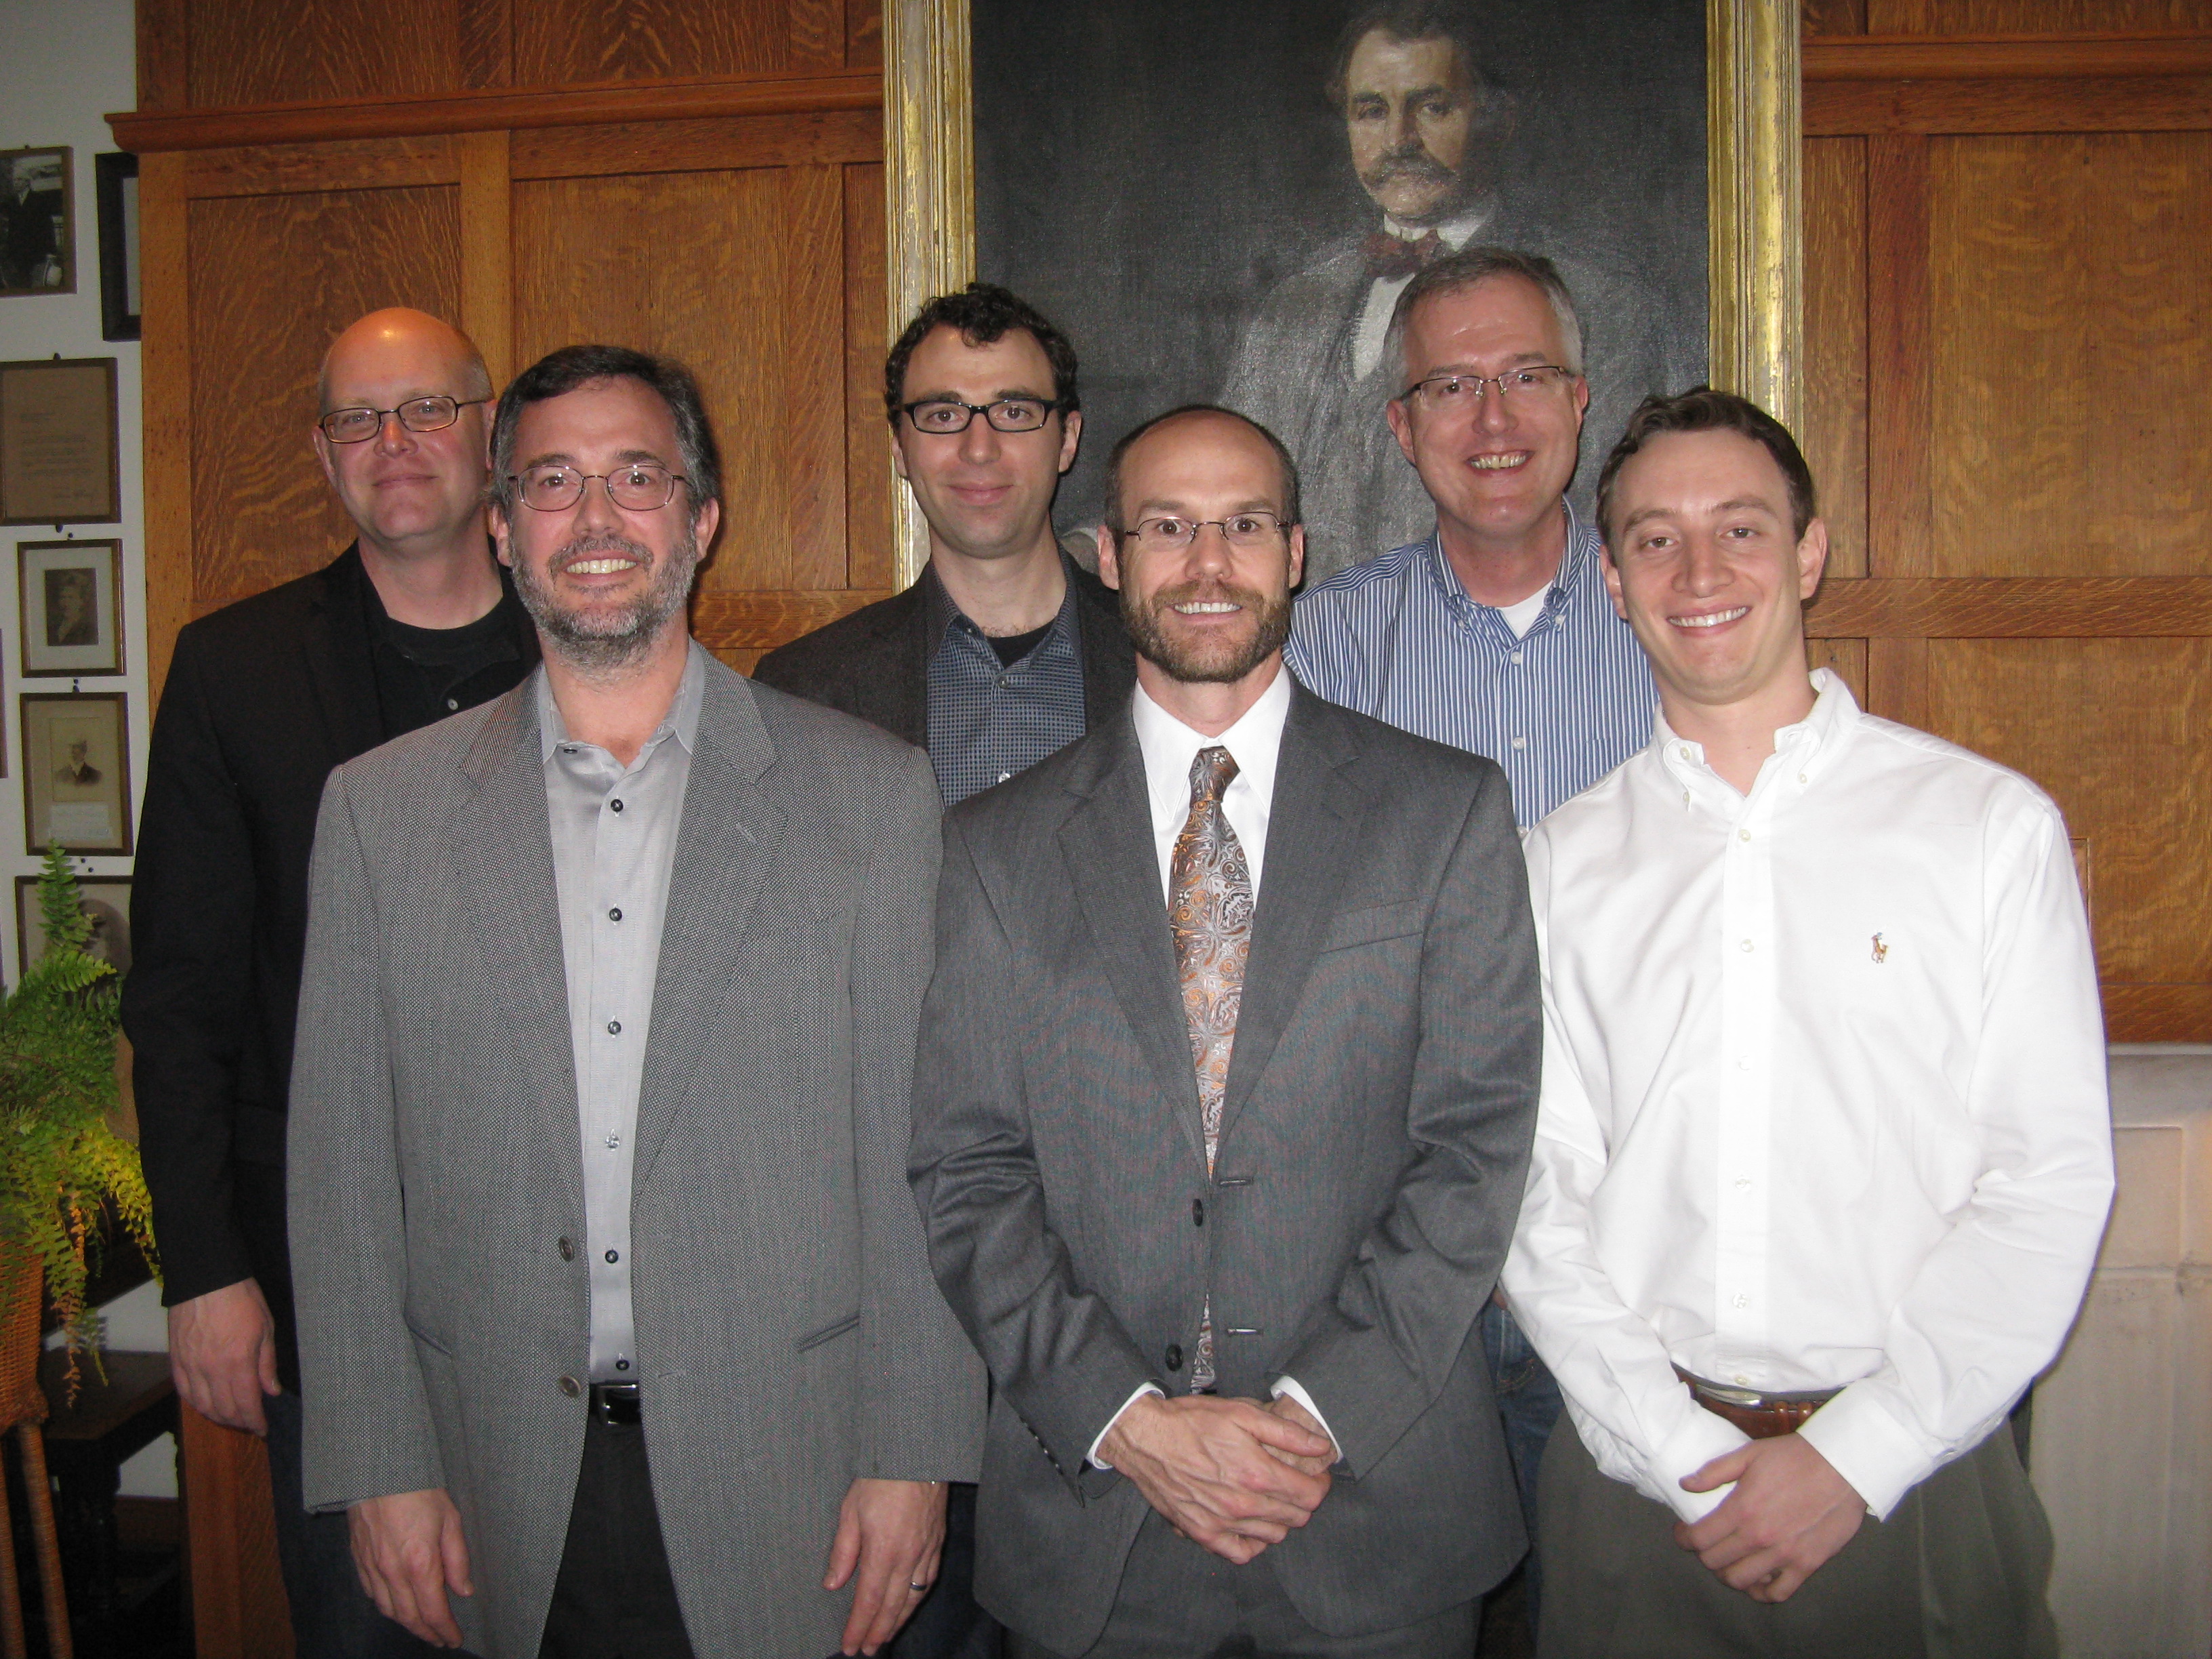 2012 Building Team Awards jury members (left to right): Timothy Brown, AIA; Pete